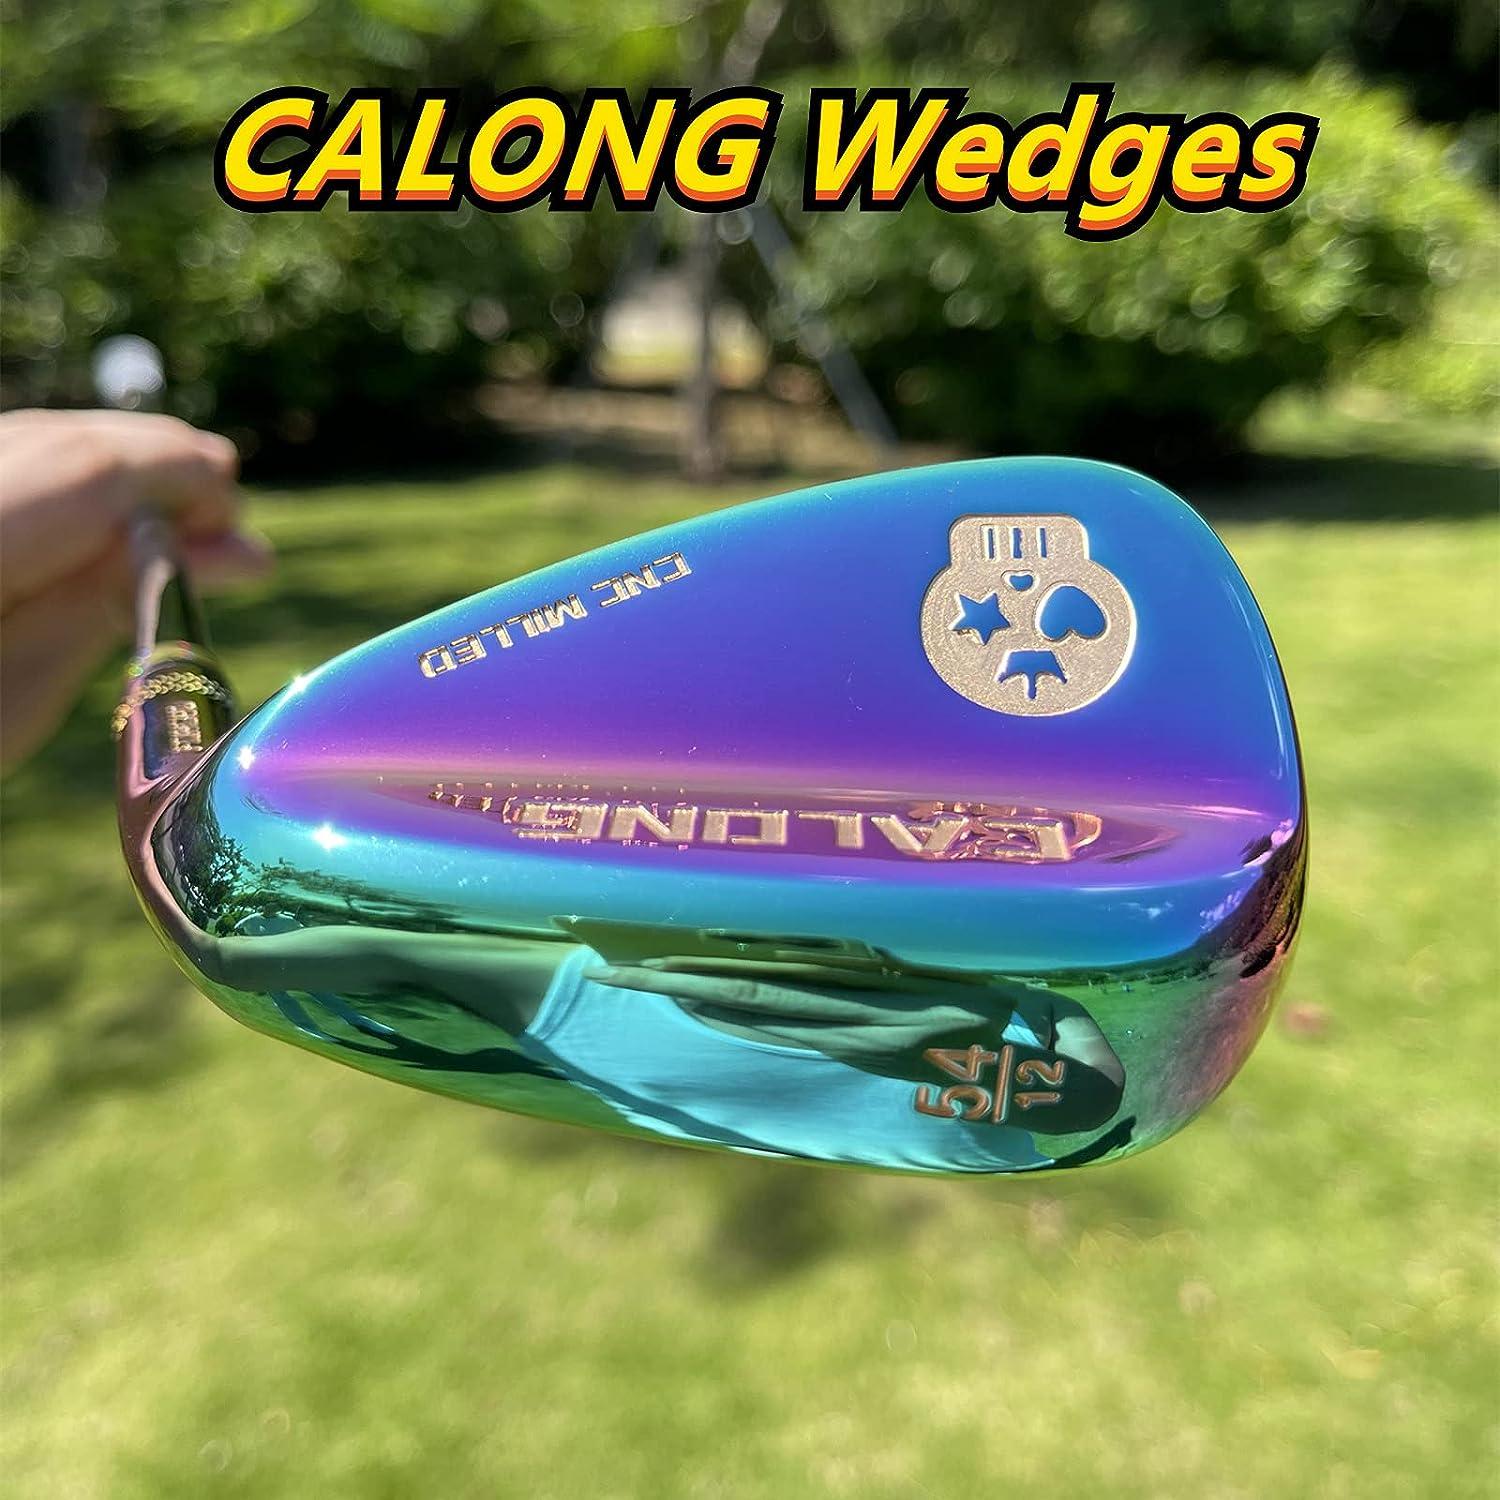 CALONG Golf Wedges S20C Forged Skull Sand Wedges for Men Right